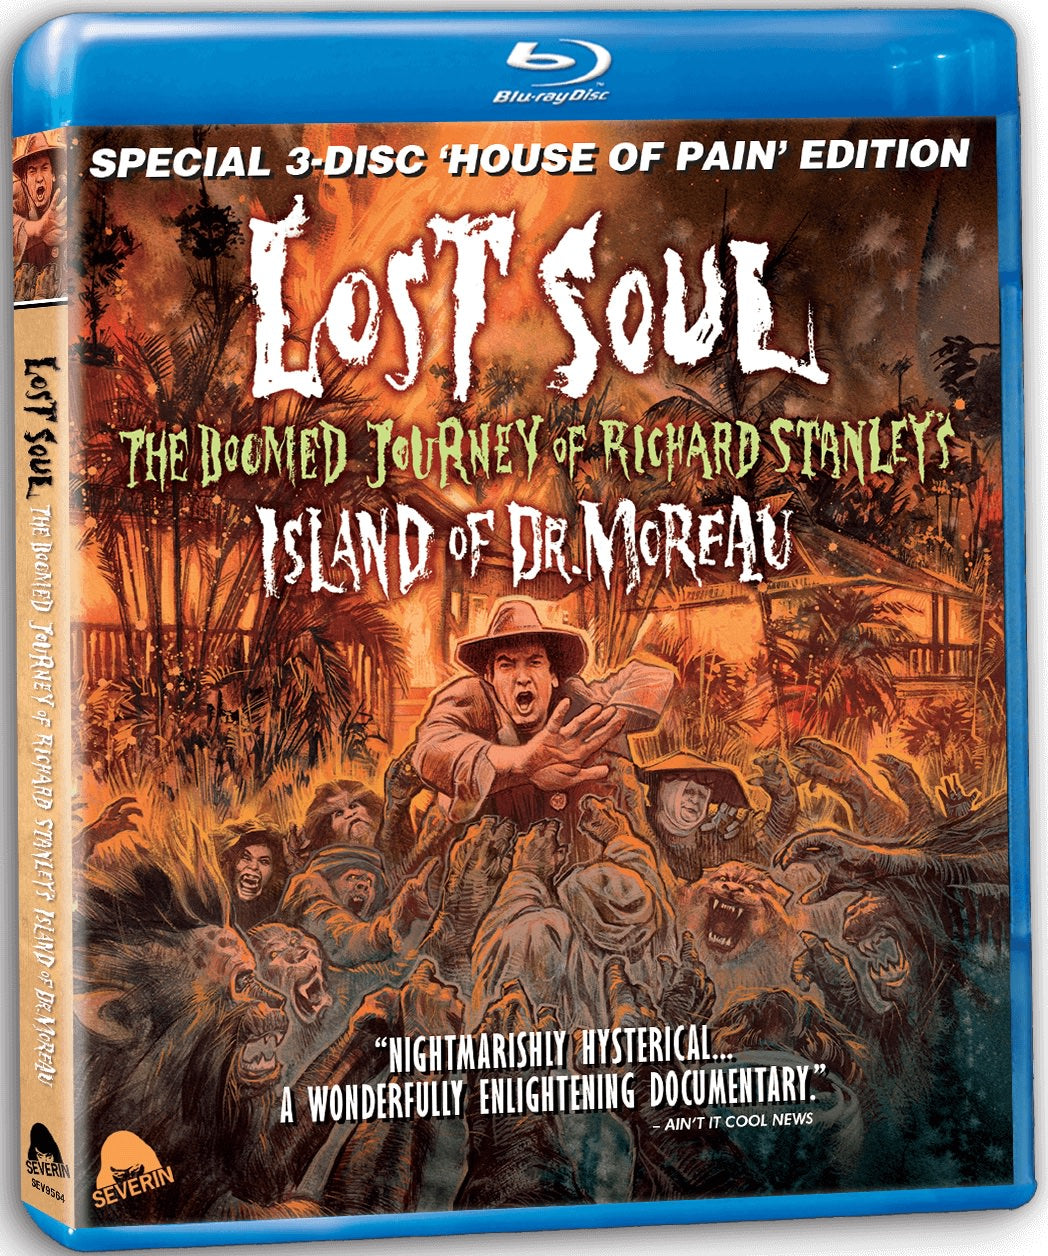 Lost Soul: The Doomed Journey of Richard Stanley's Island of Dr. Moreau [3-Disc House of Pain Edition Blu-ray]